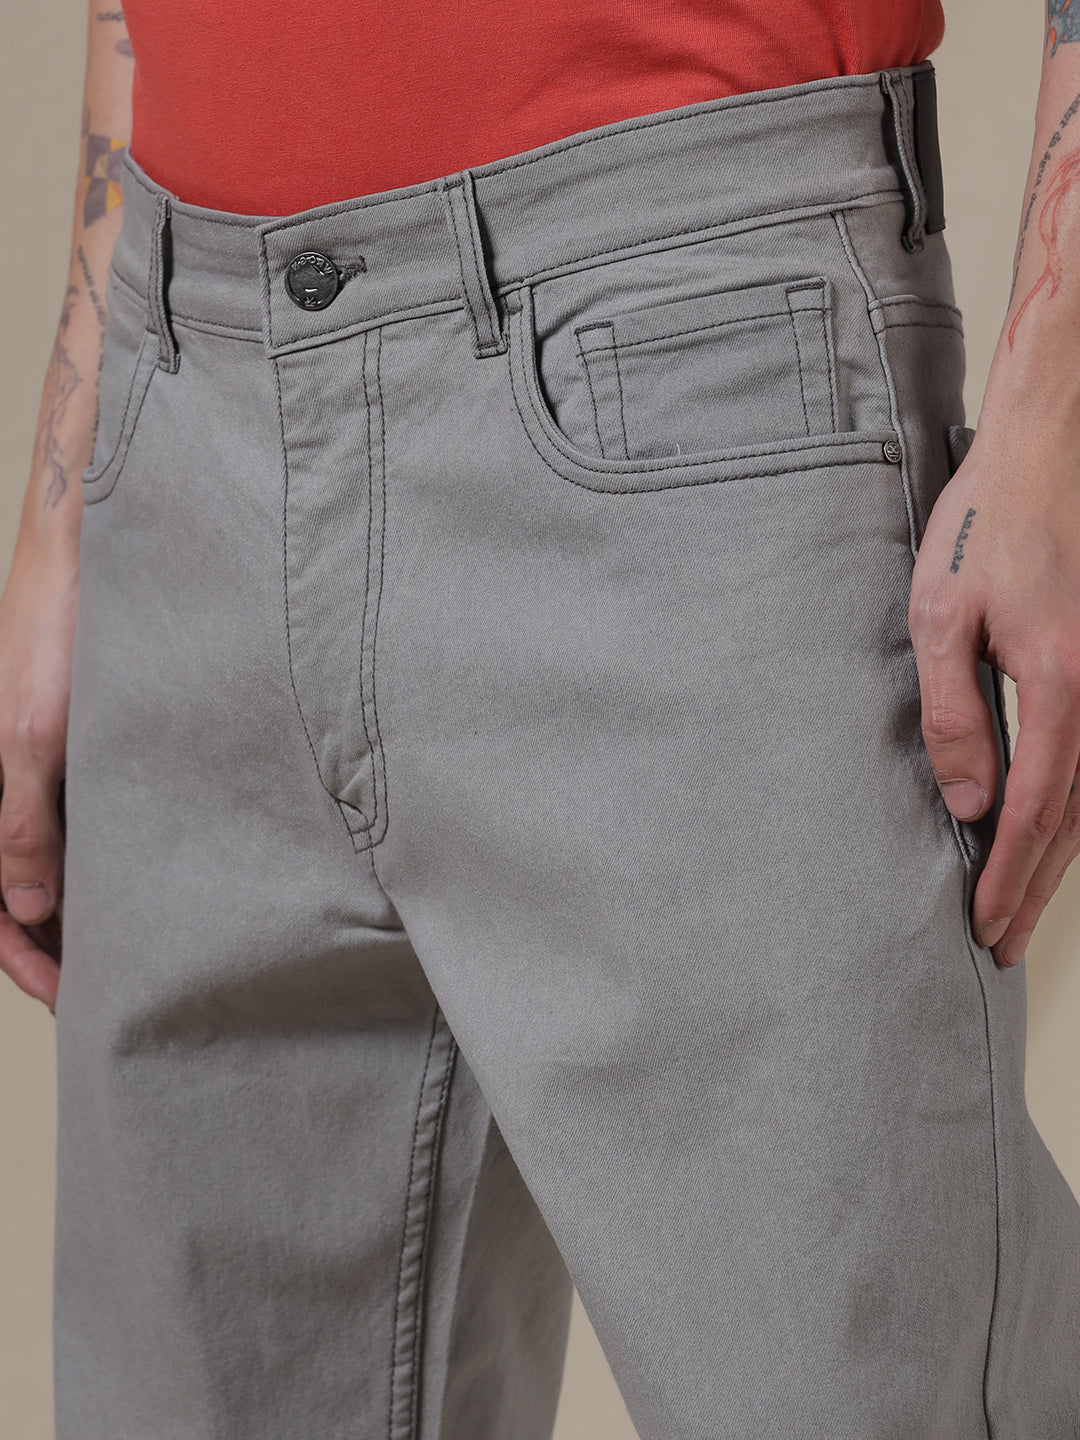 Clean Lines Grey Anti Fit Jeans